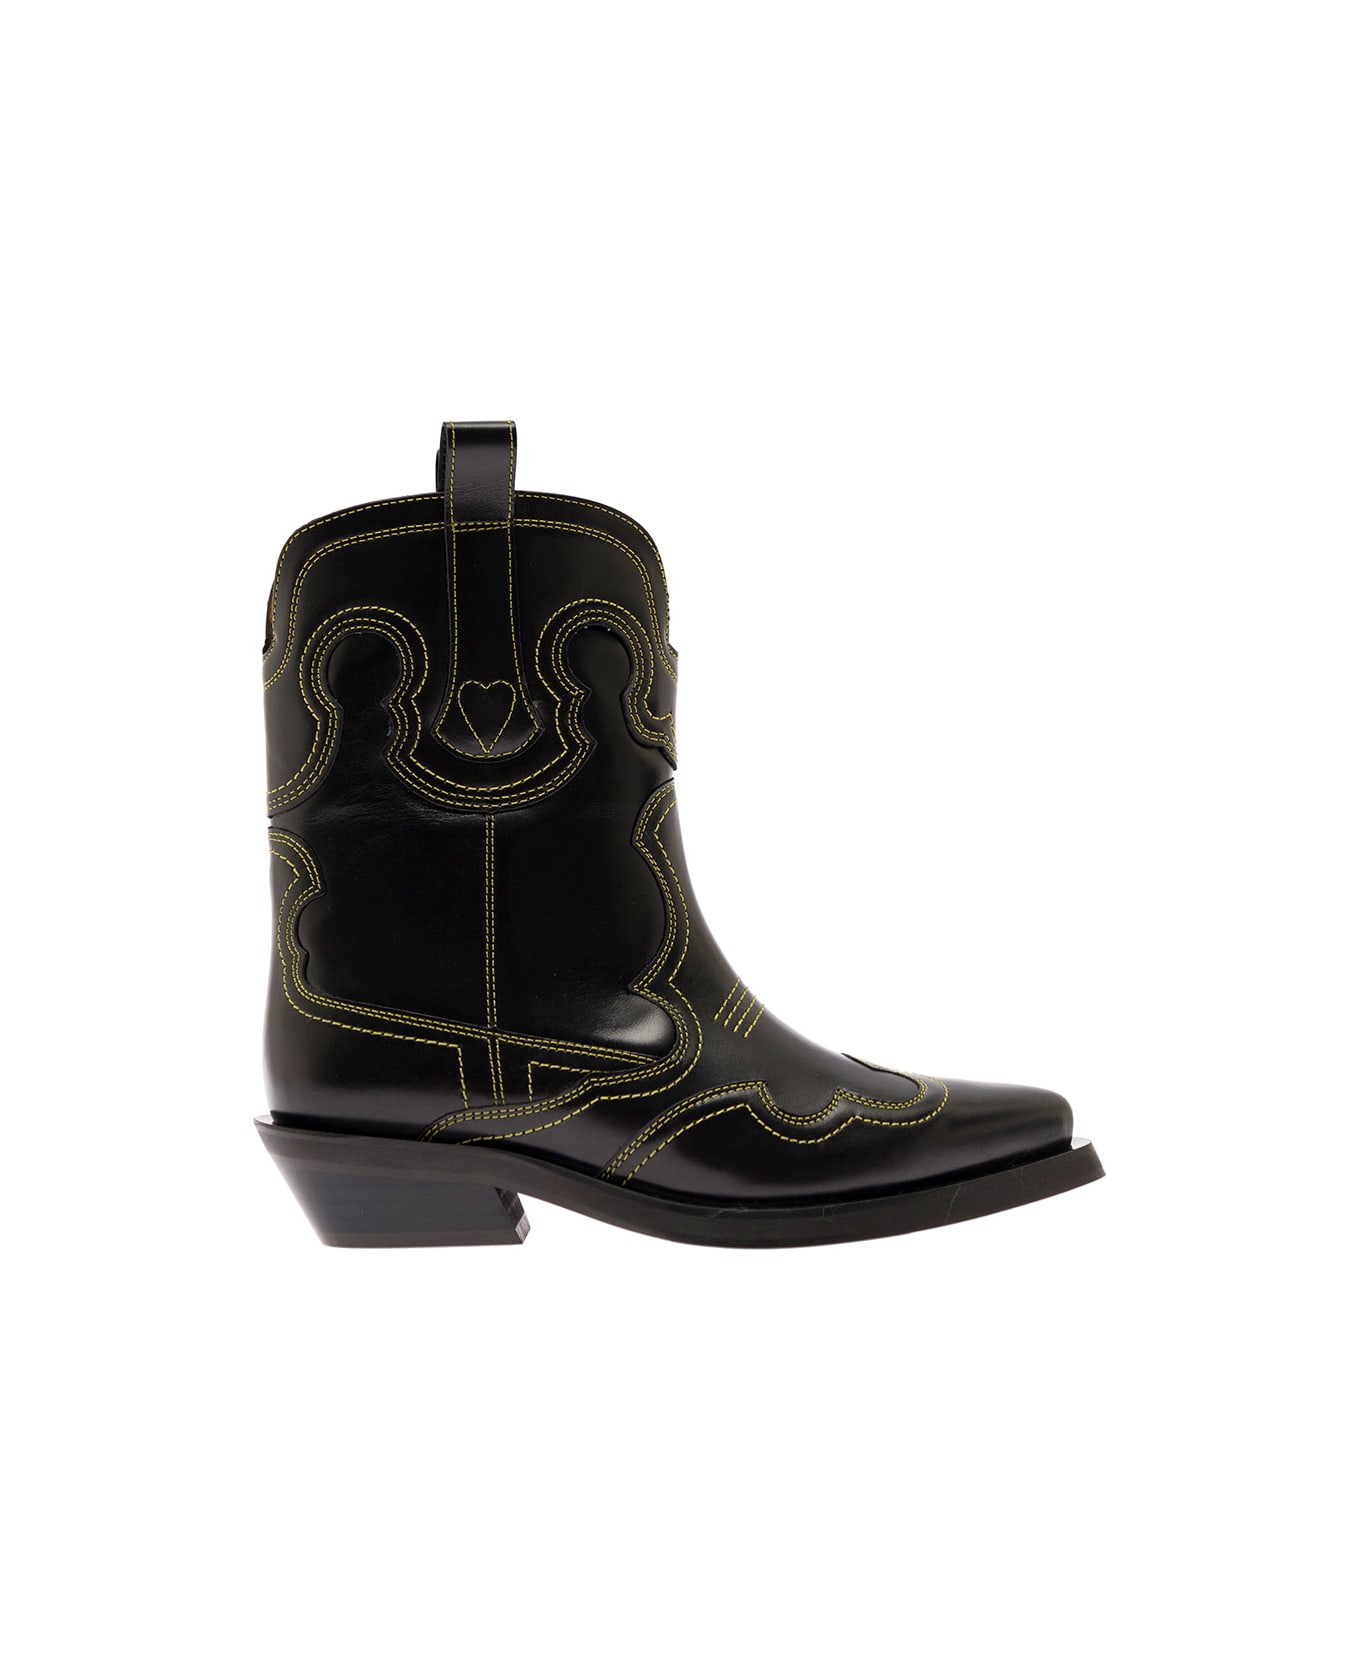 Ganni Black Camperos Boots With Stitchings In Leather Woman - Black ブーツ